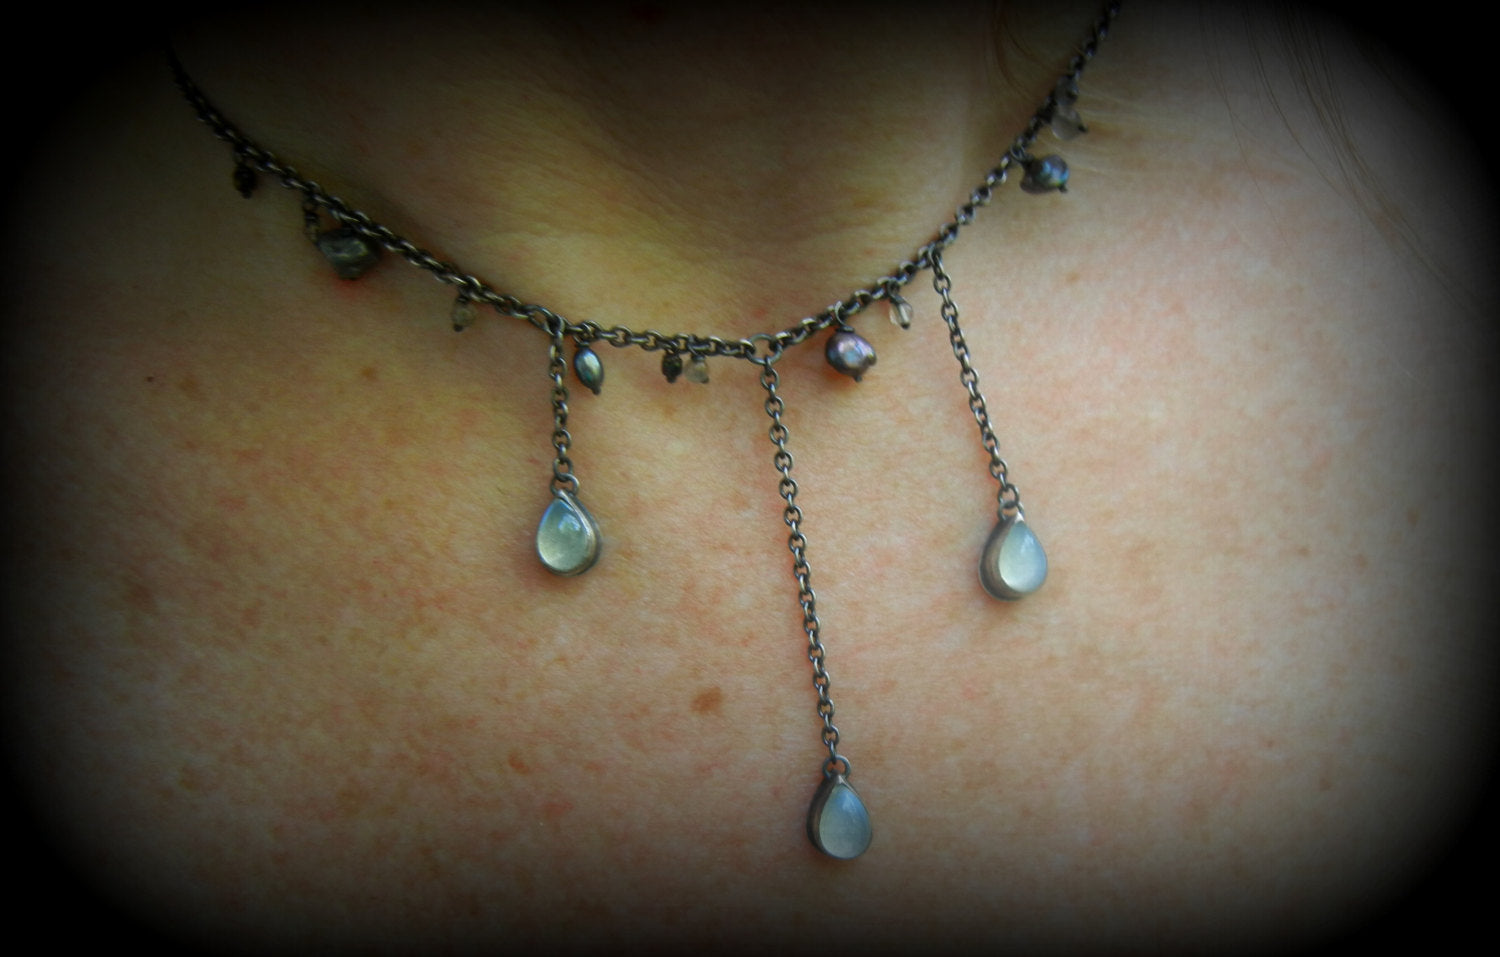 Moonstone Raindrop Bib Necklace, Grey FW Pearls, Faceted Bead Clasp